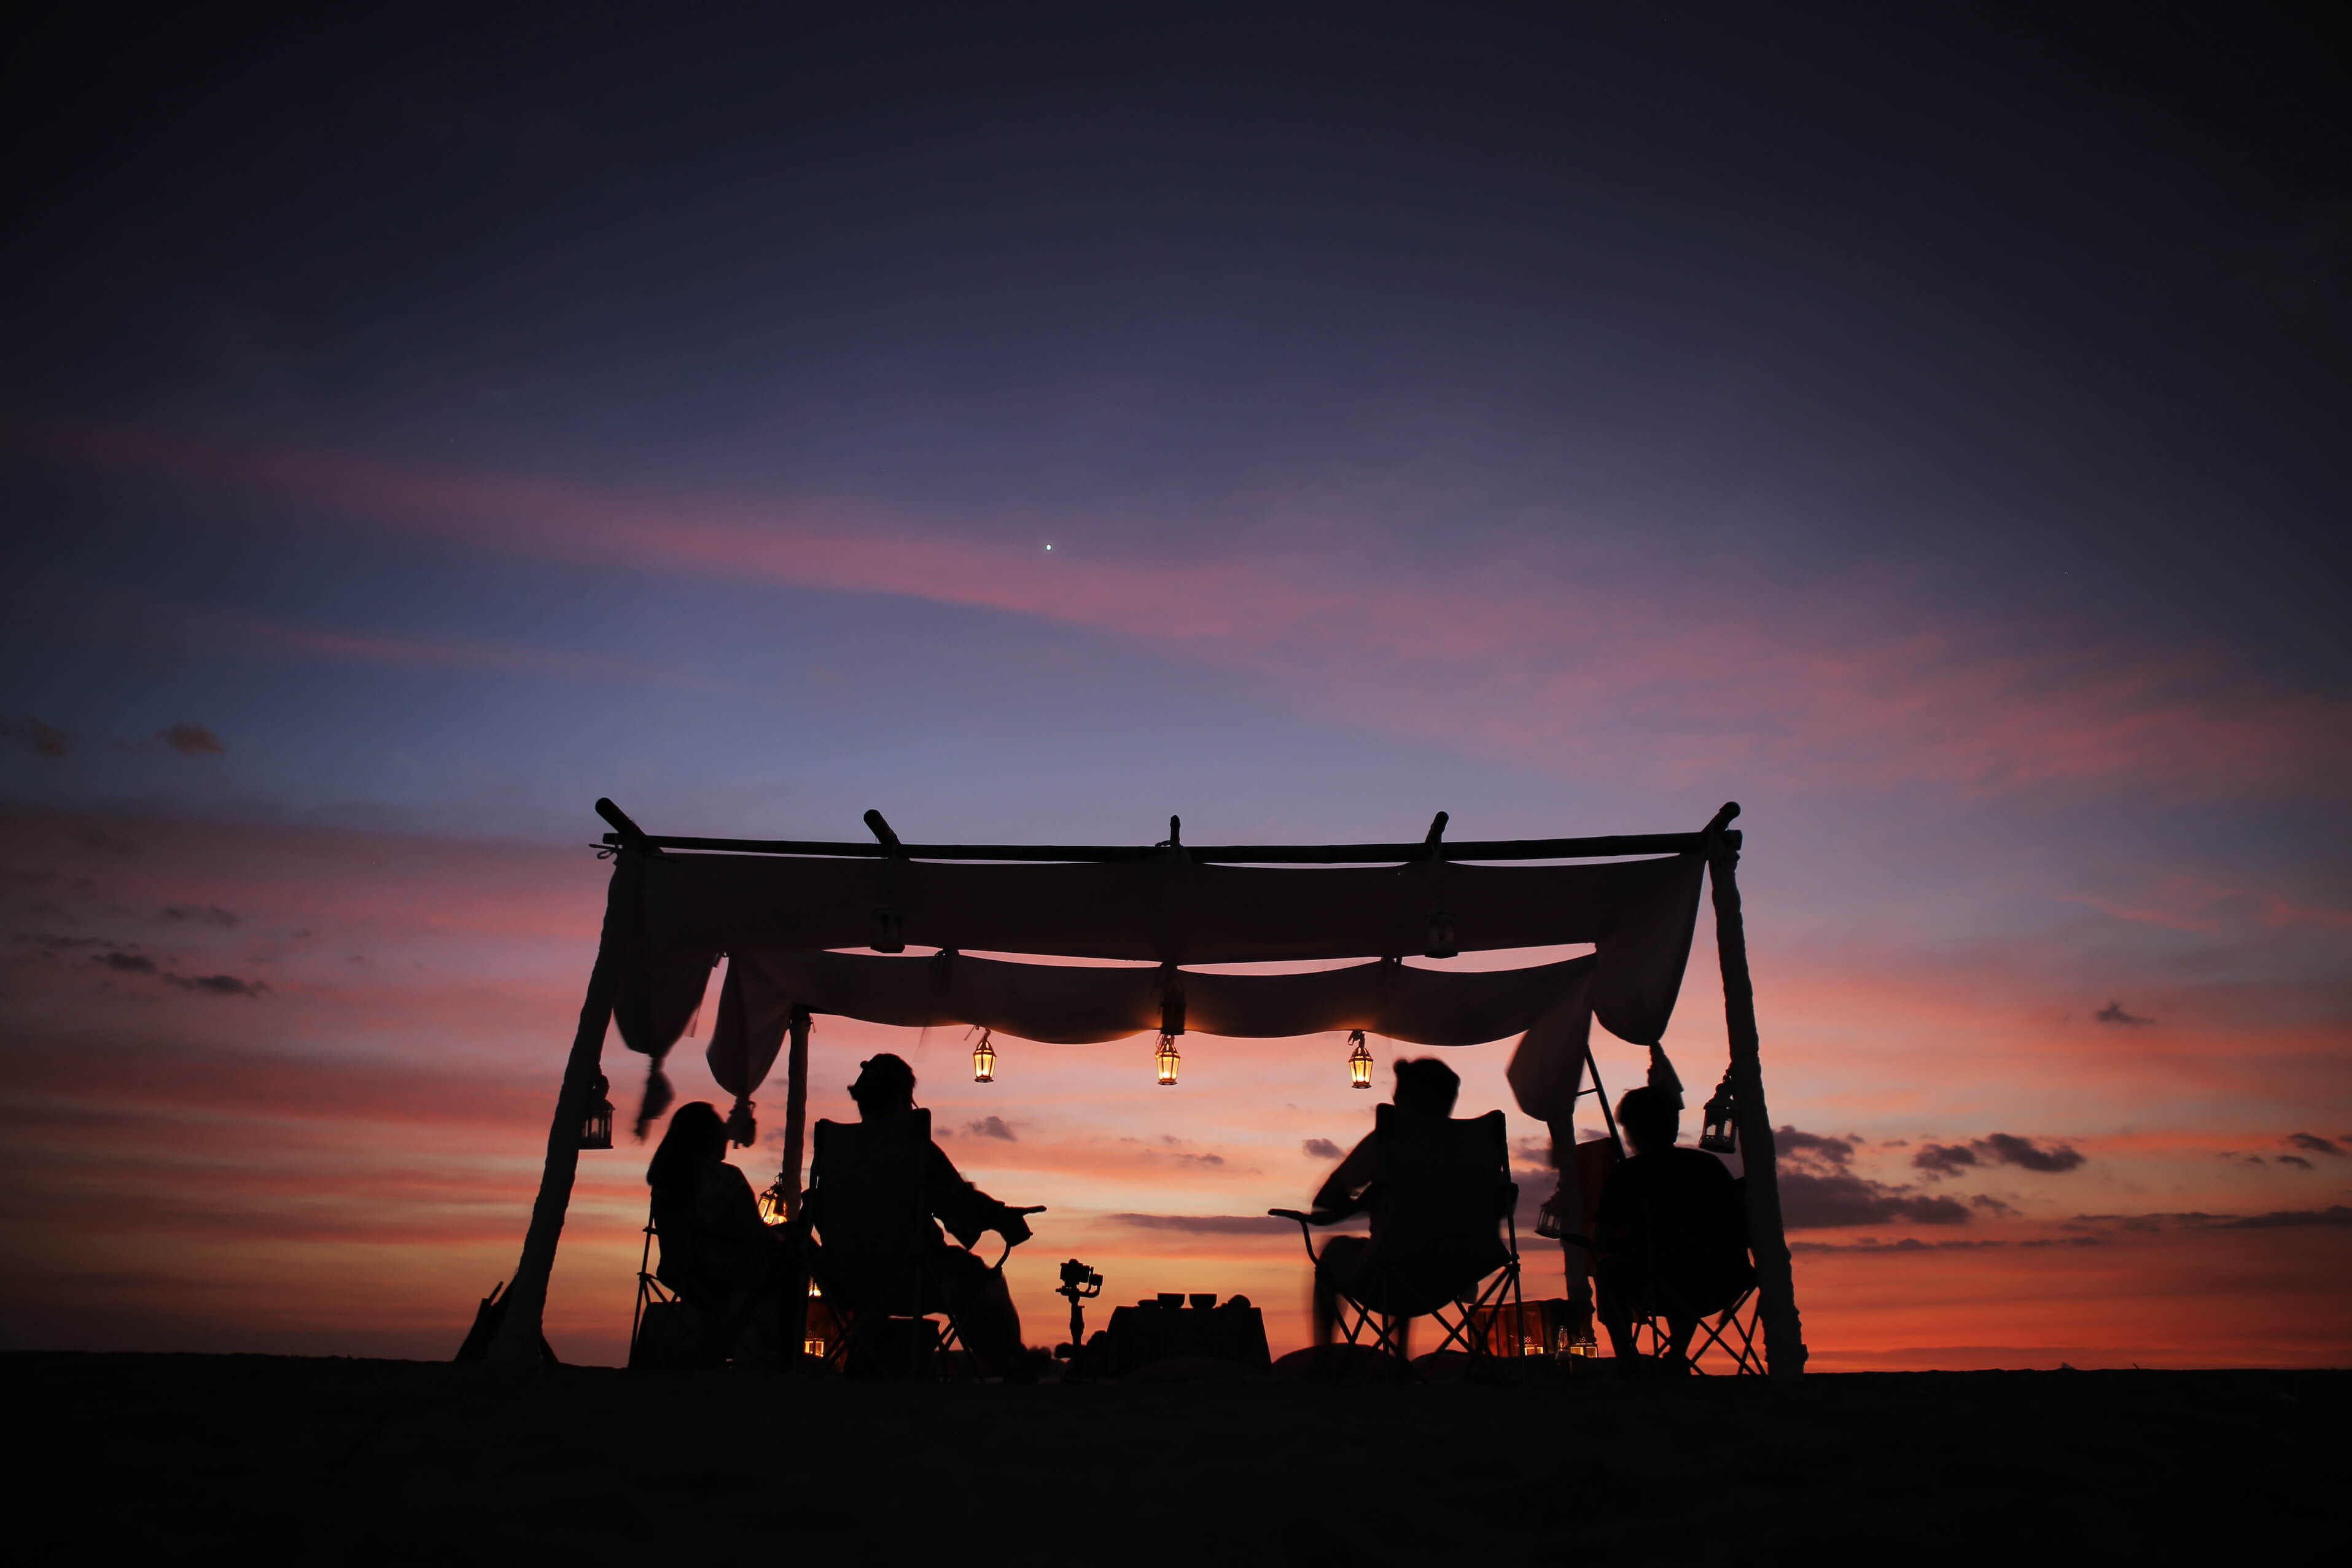 A group of people sit under tent watching a dazzling sunset in the background.